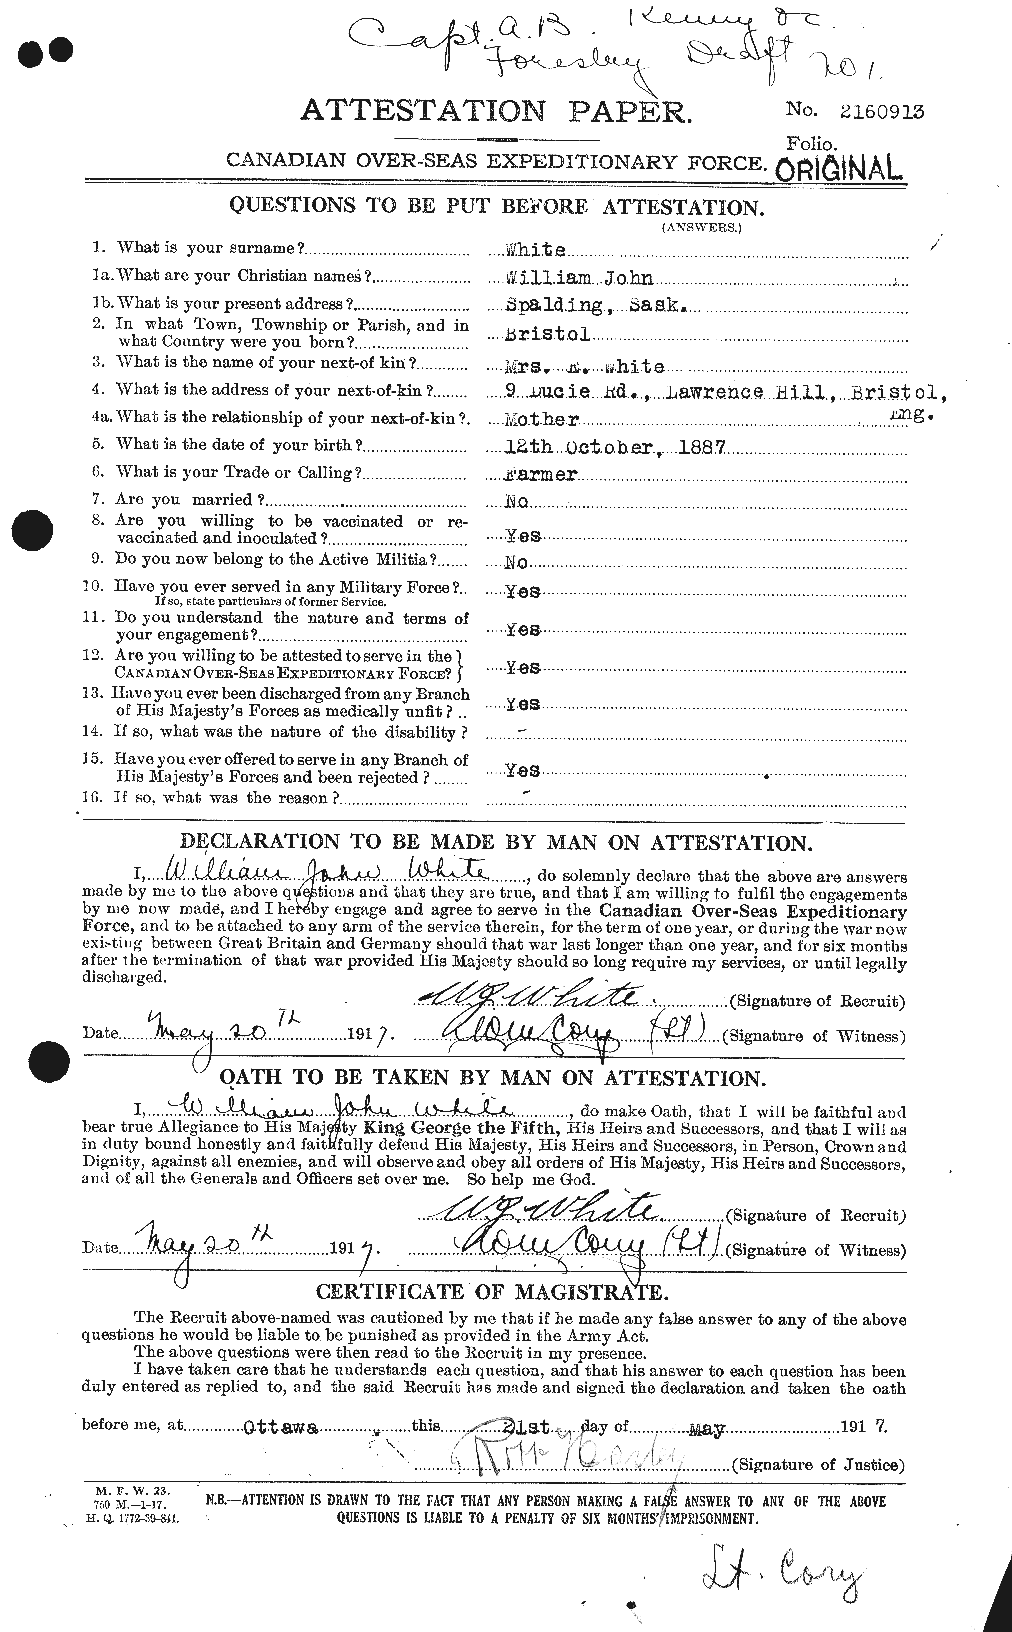 Personnel Records of the First World War - CEF 669053a